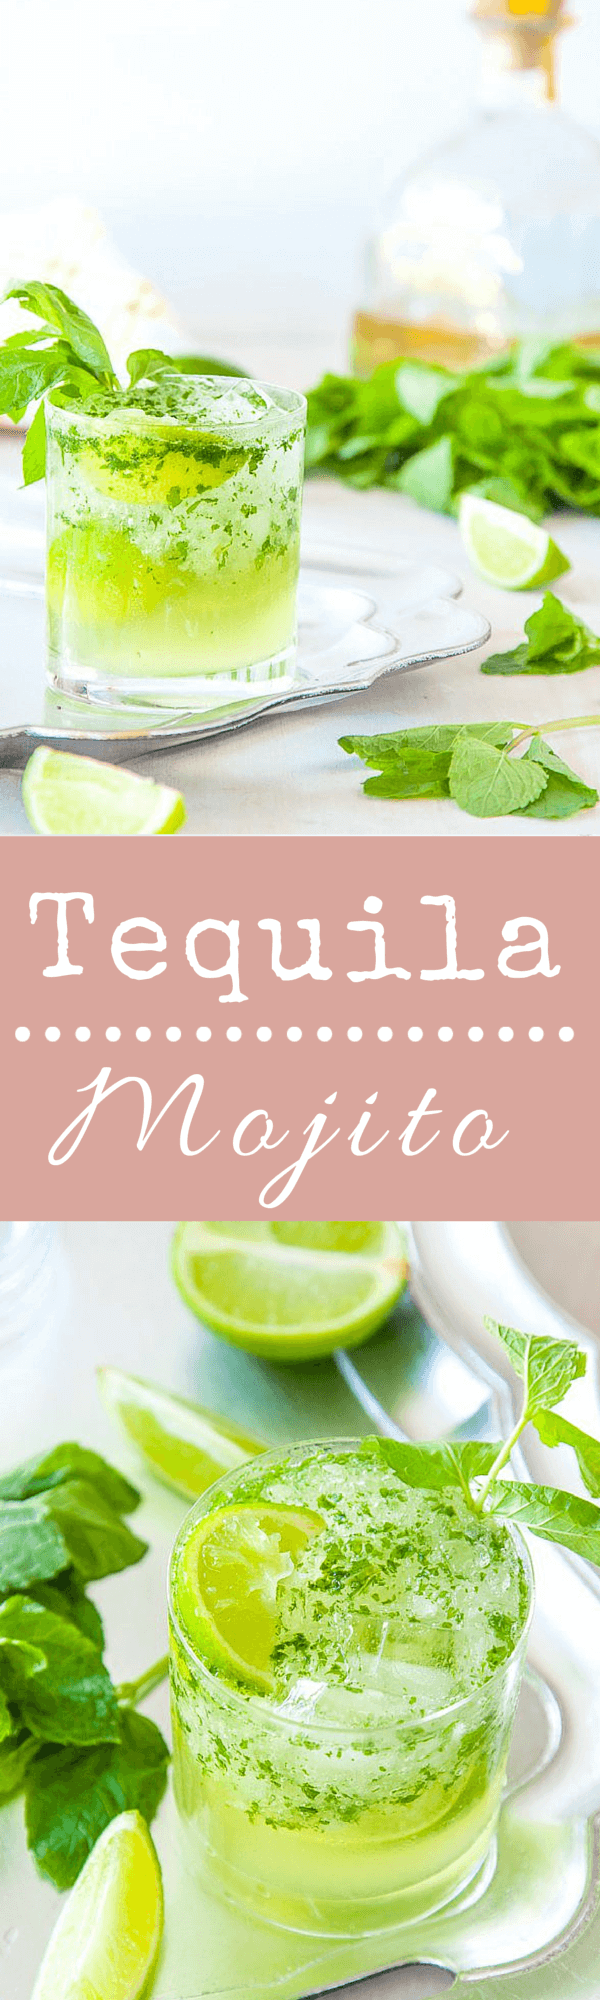 Tequila Mojito - the classic mojito gets an update with Tequila